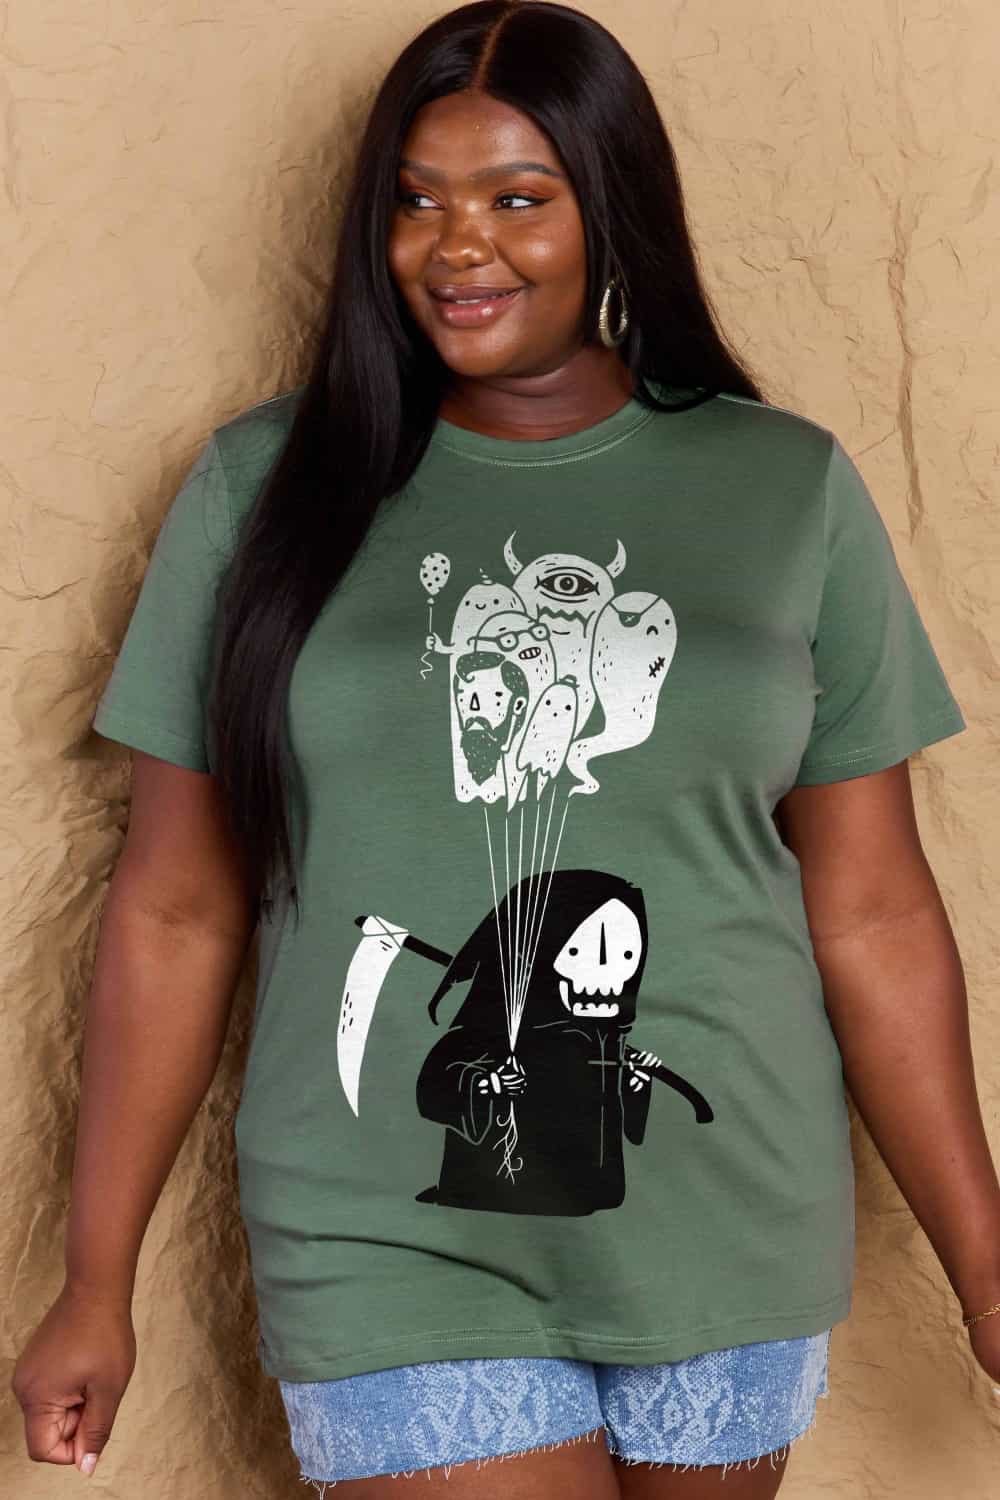 Full Size Death Graphic T-Shirt - Green / S - T-Shirts - Shirts & Tops - 13 - 2024